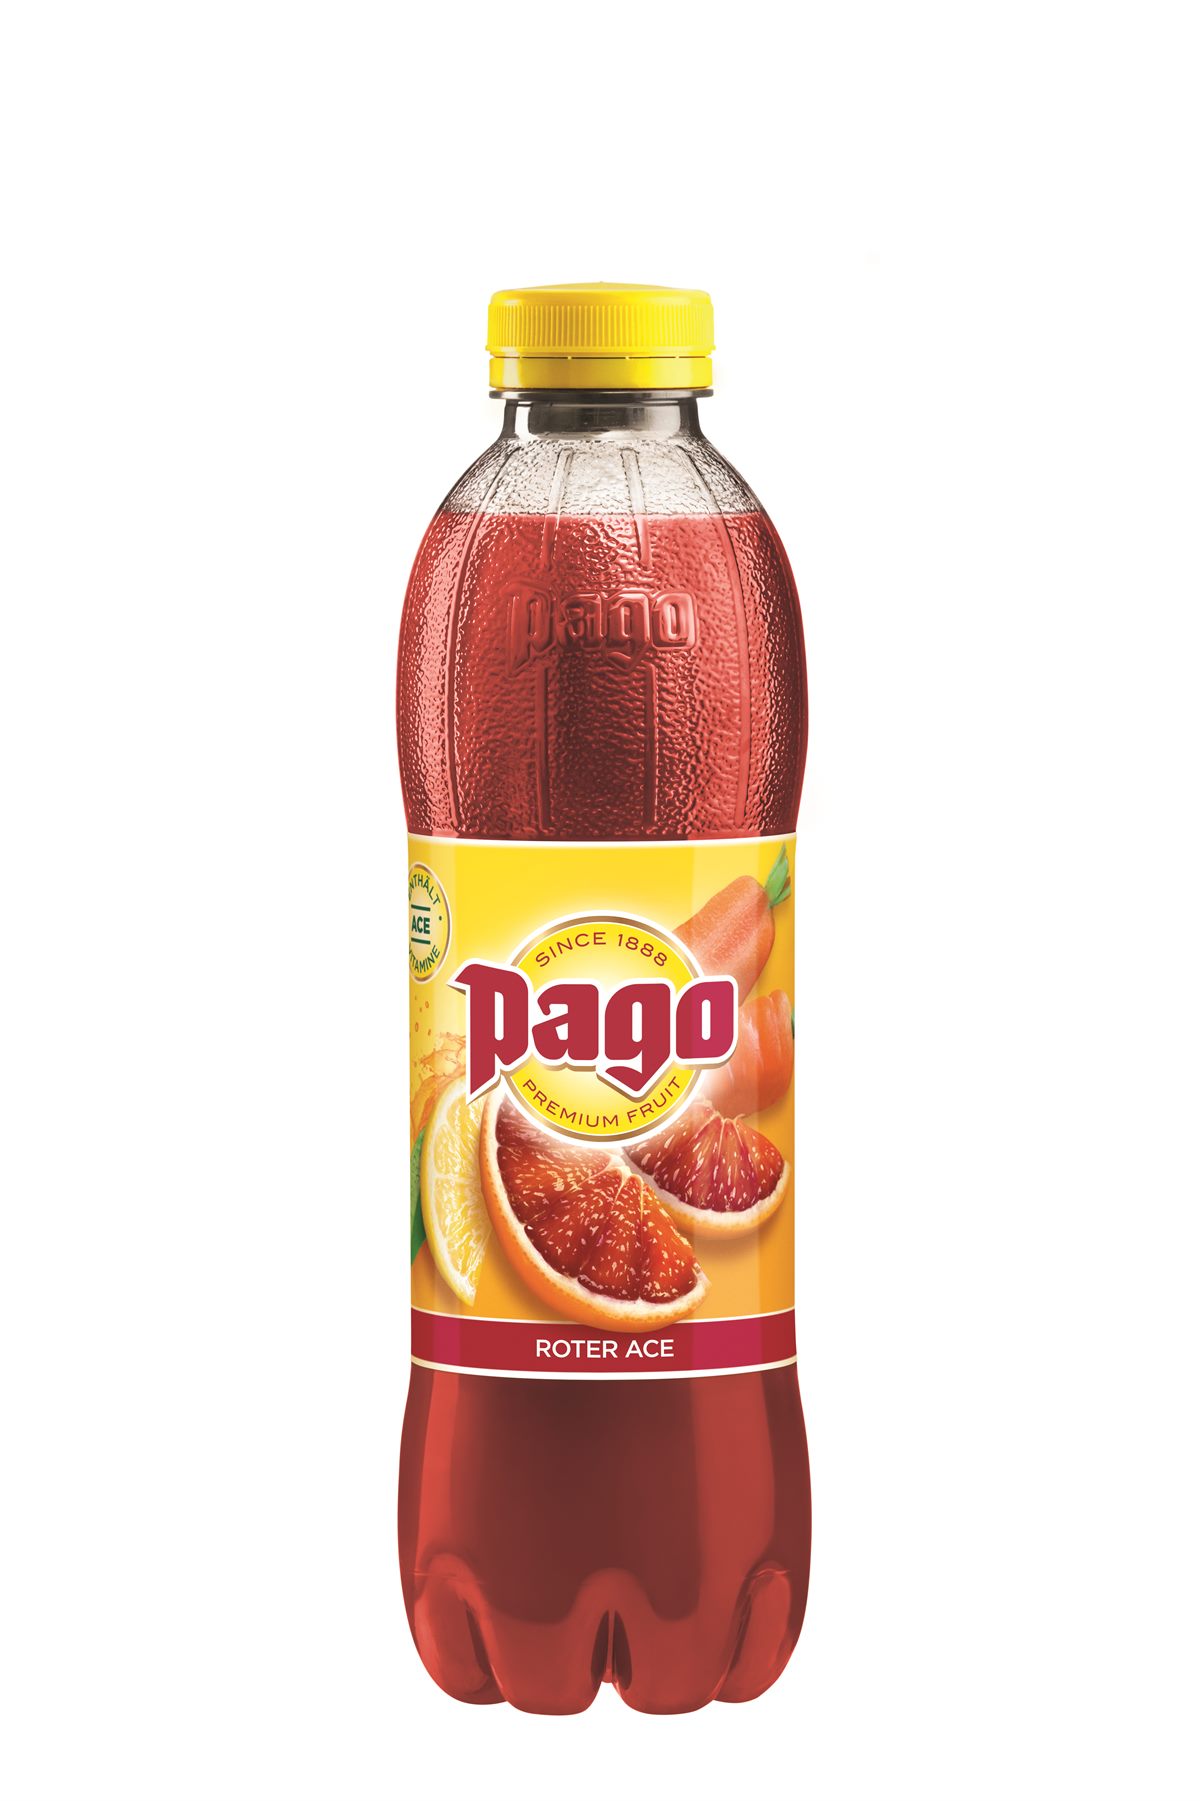 Pago Roter ACE 750ml